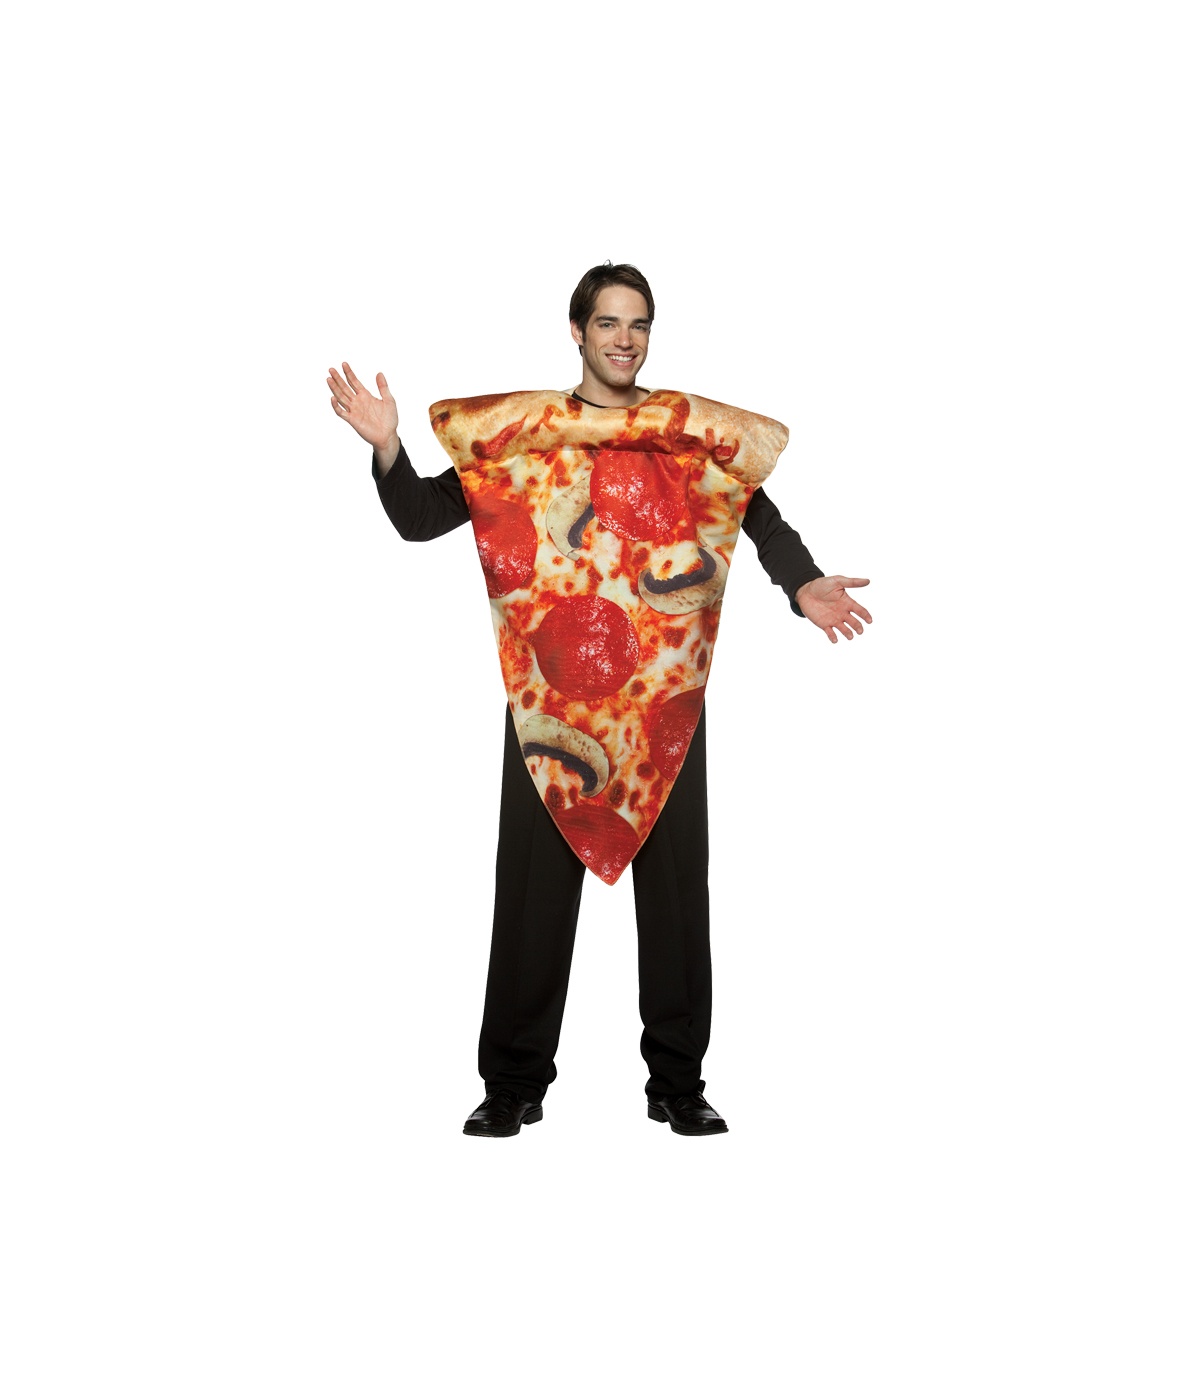 Get Real Pizza Costume